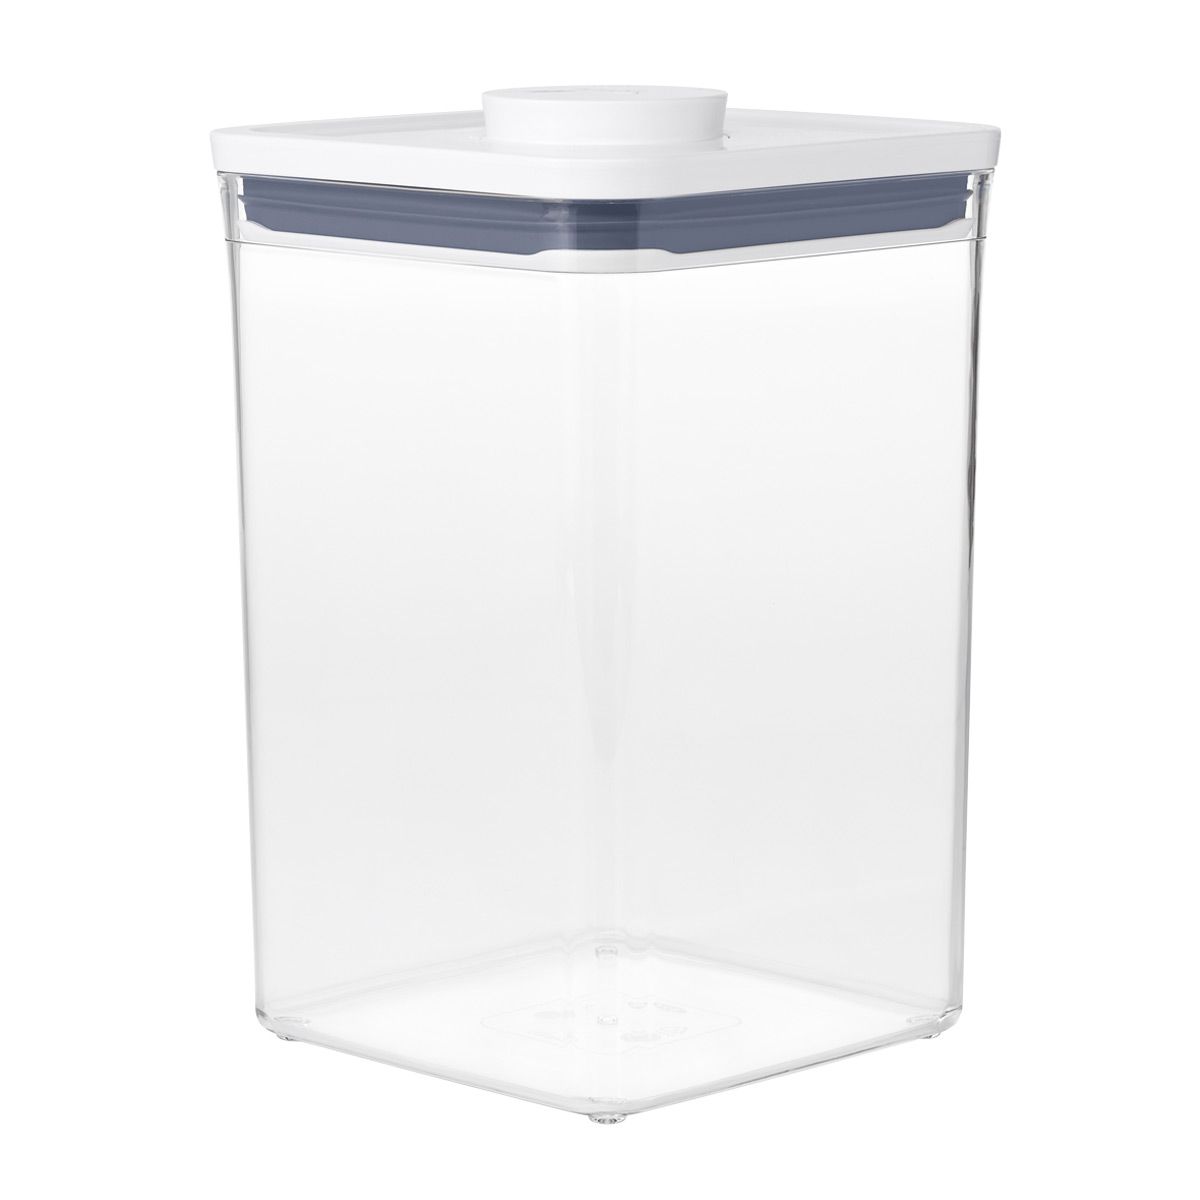 POP Container Big Square | The Container Store